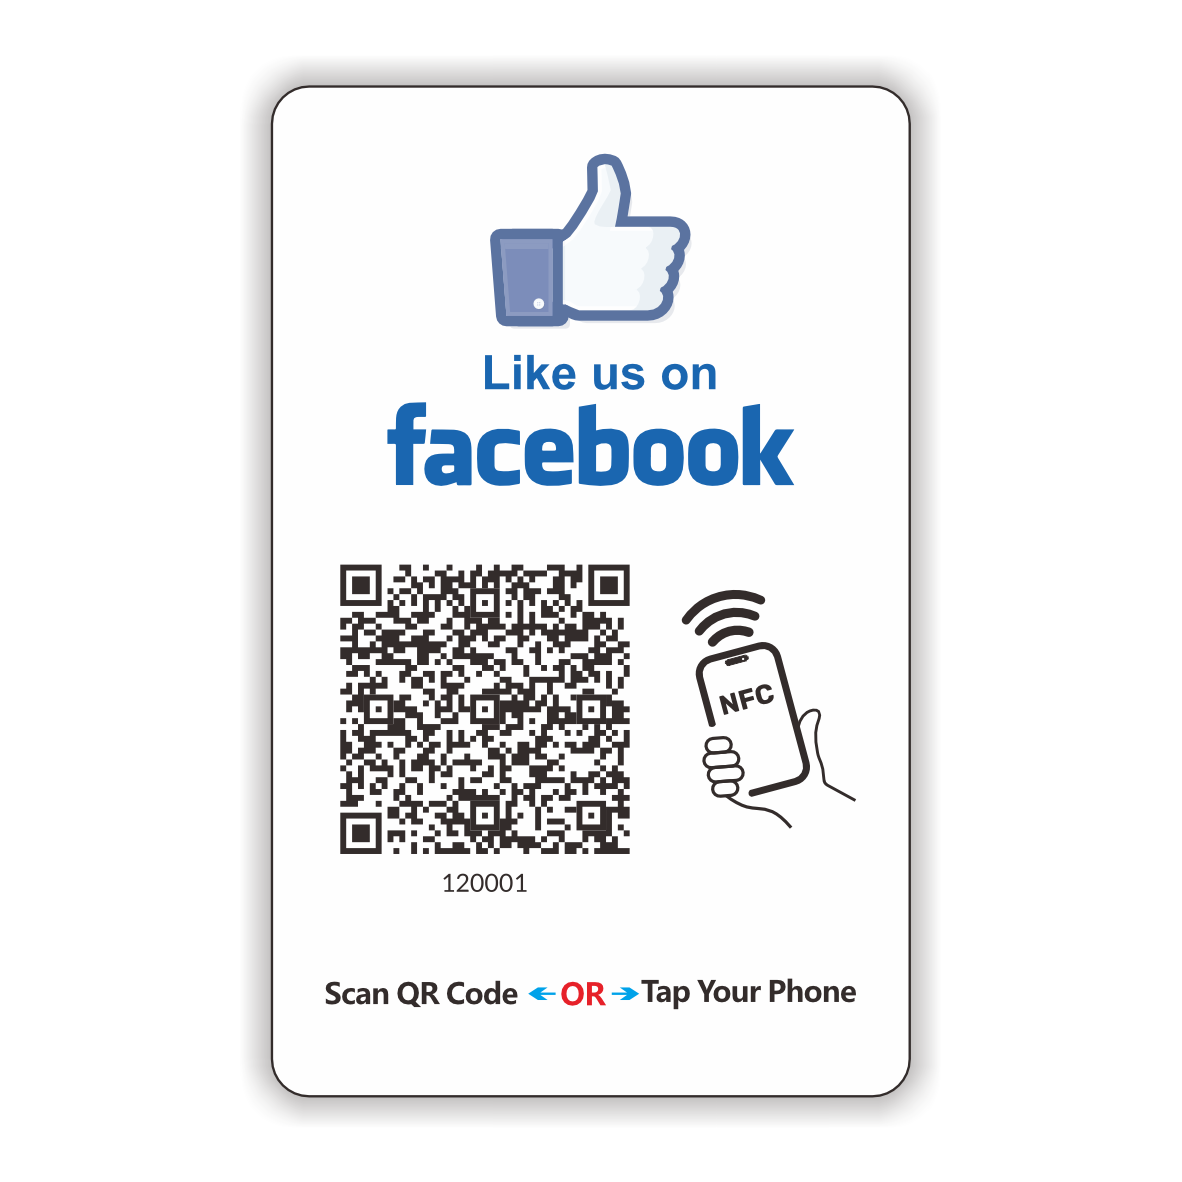 Contactless Sharing Smart NFC Facebook Connect Card Touchless Reusable QR Code